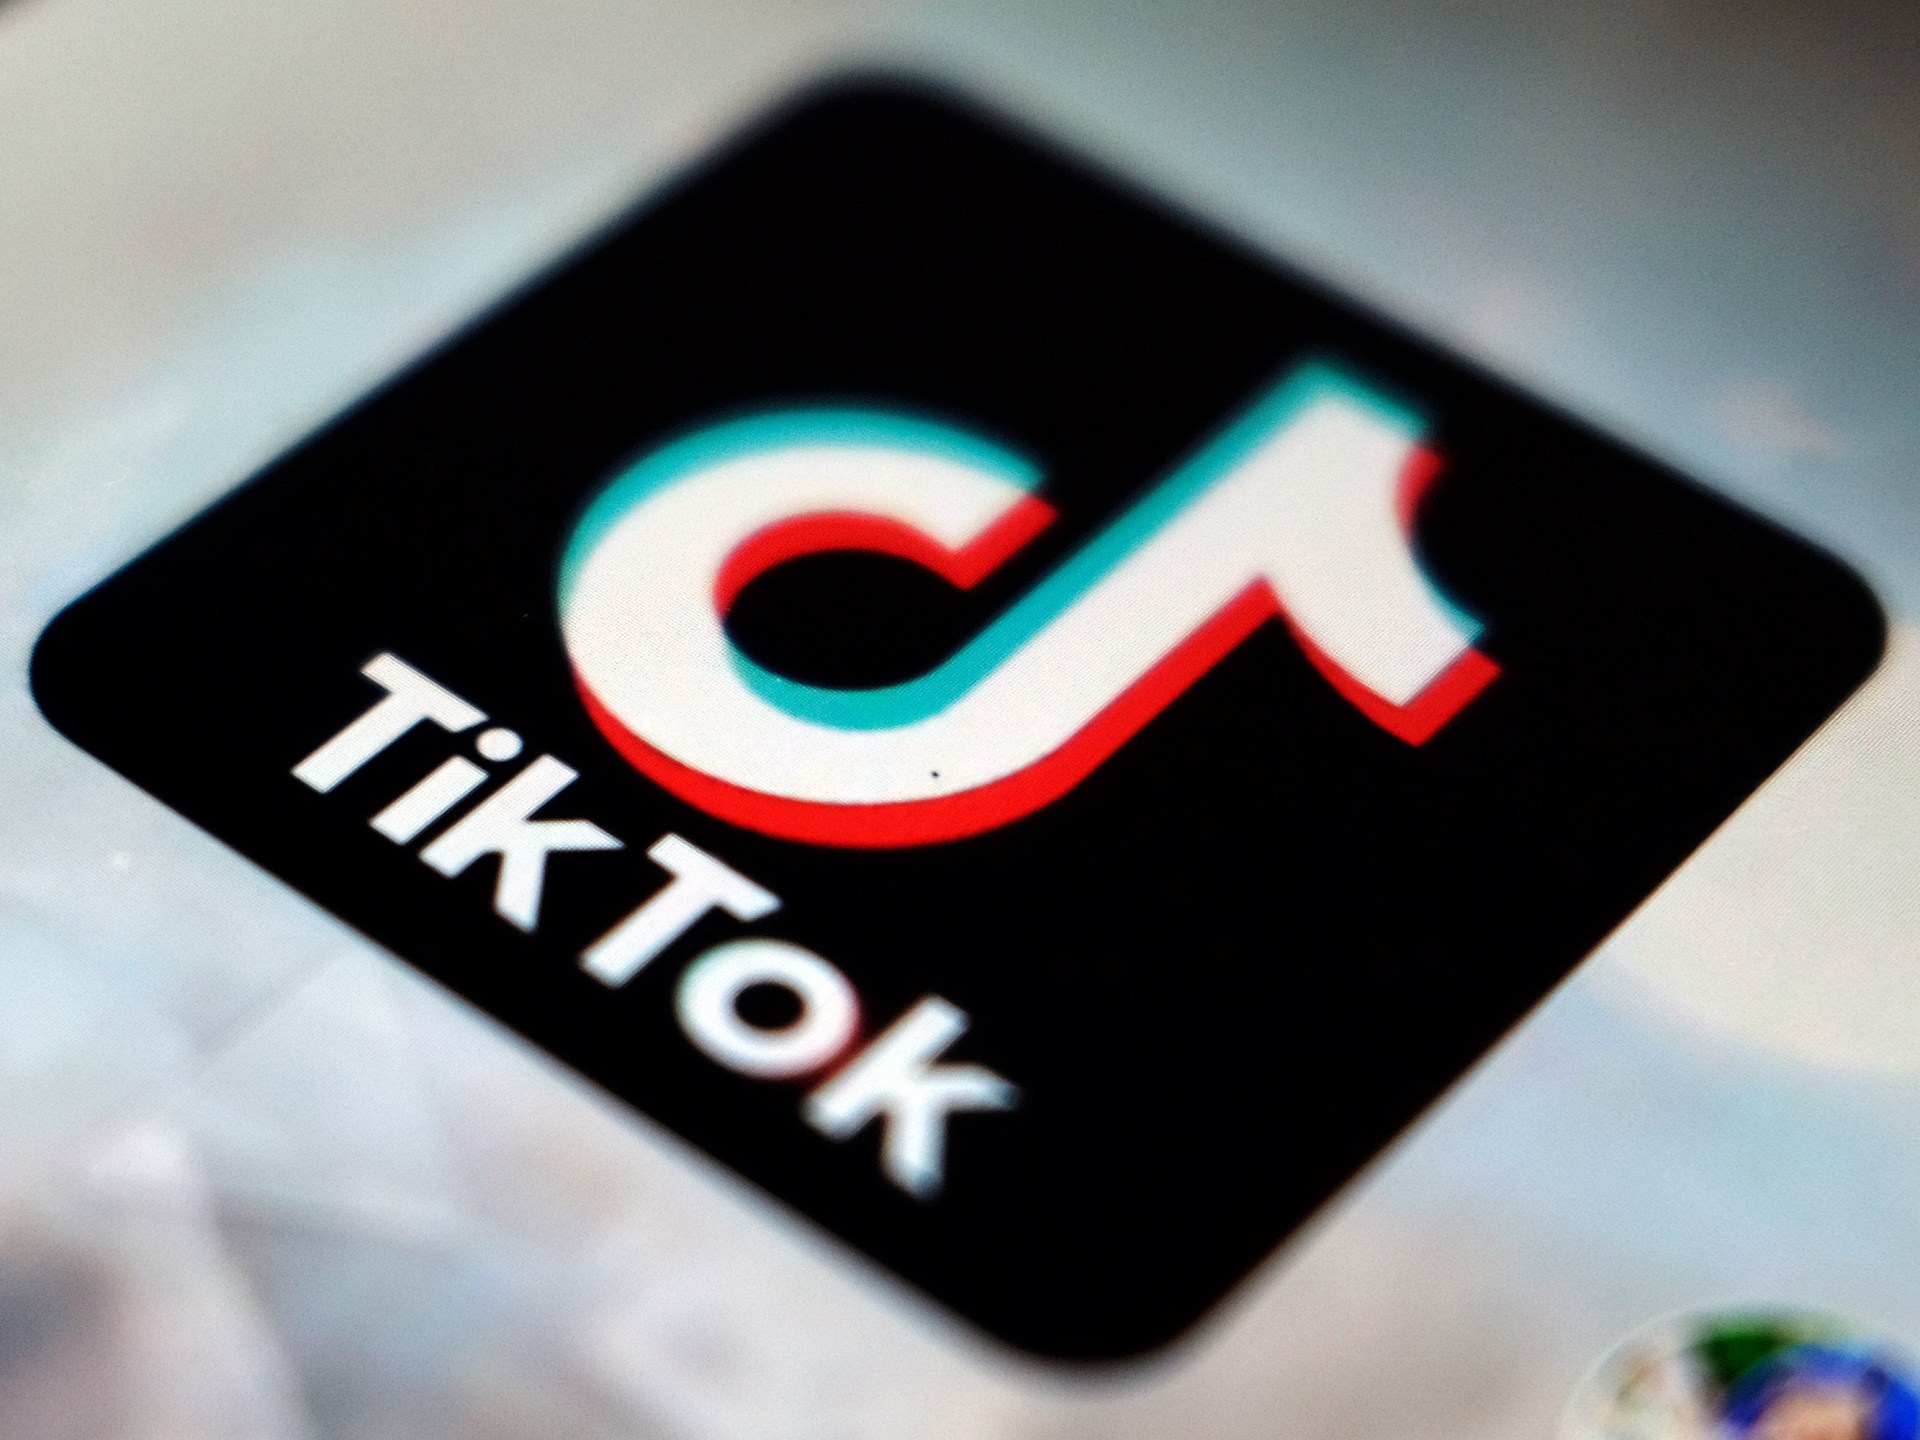 US lawmakers mull restrictions on TikTok over safety considerations